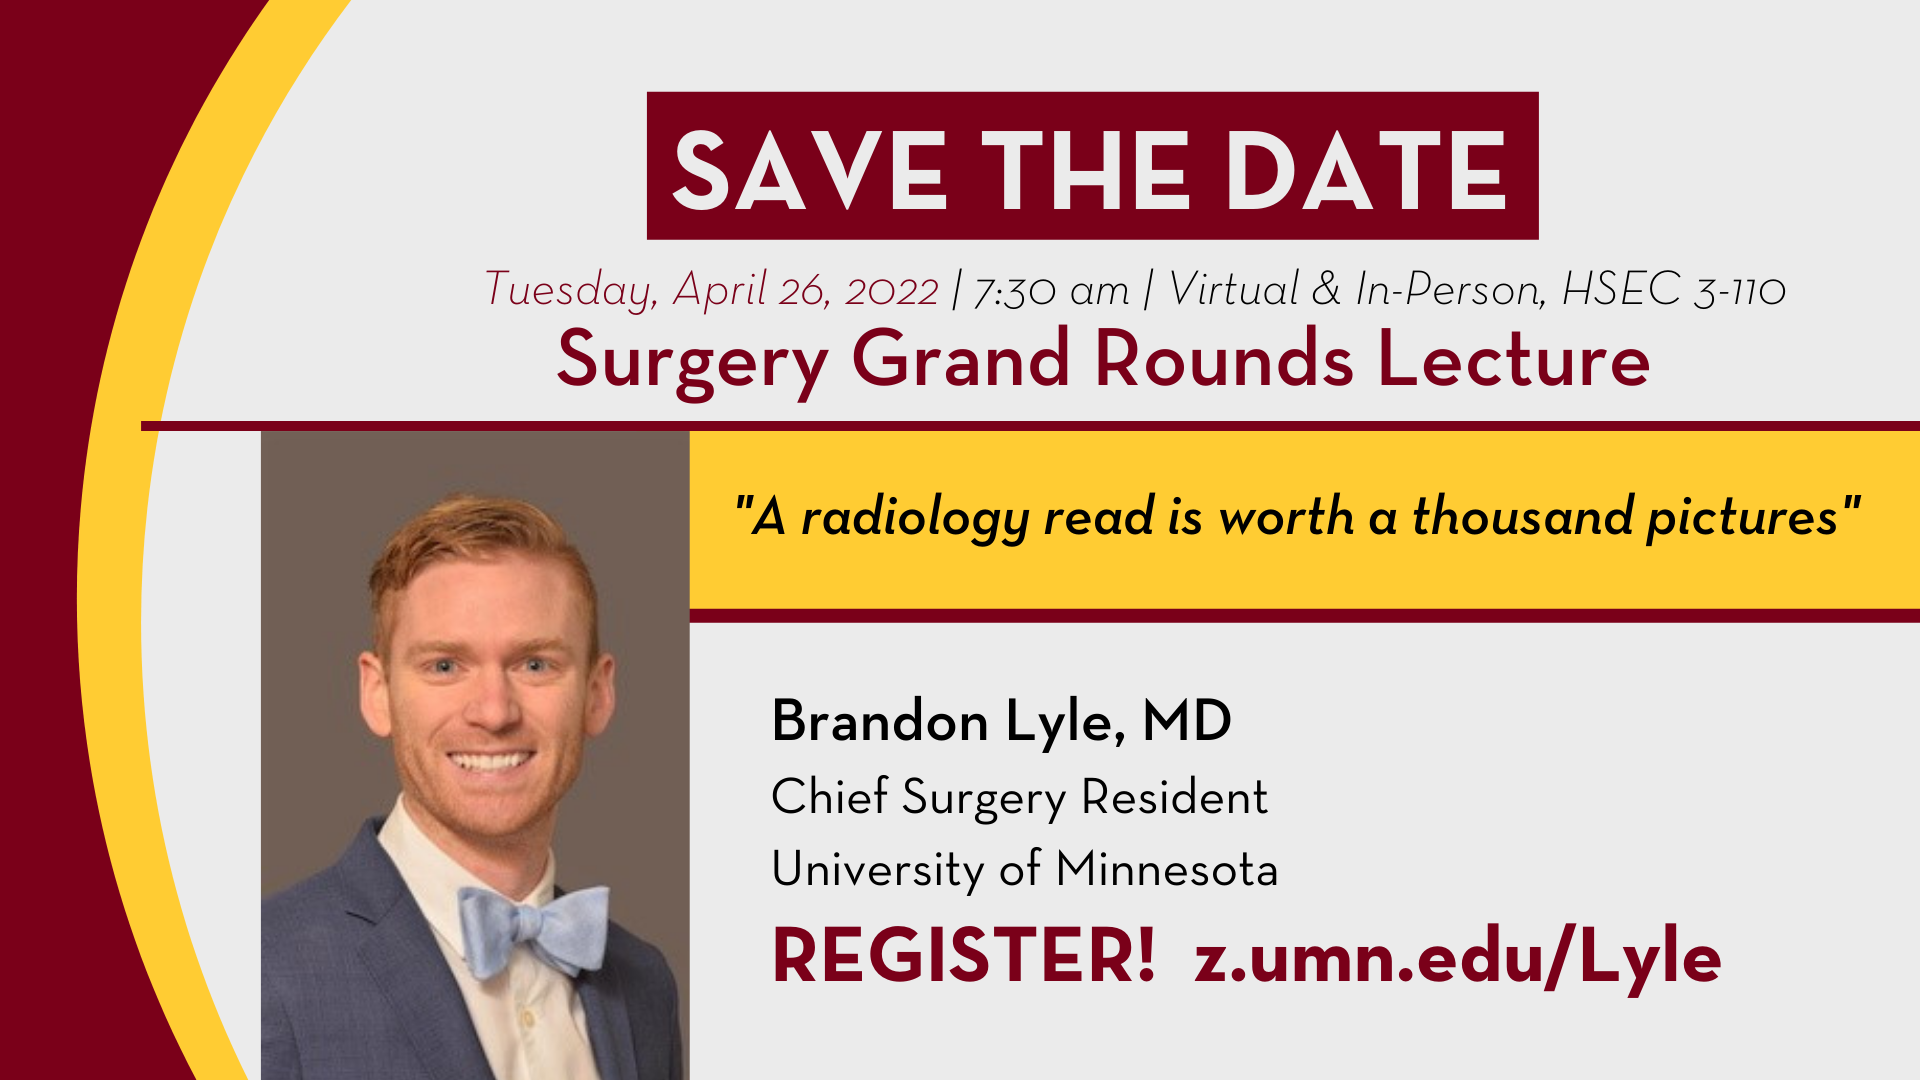 Surgery Grand Rounds w/ Chief Surgery Resident, Dr. Brandon Lyle TUESDAY, APRIL 26 AT 7:30 AM